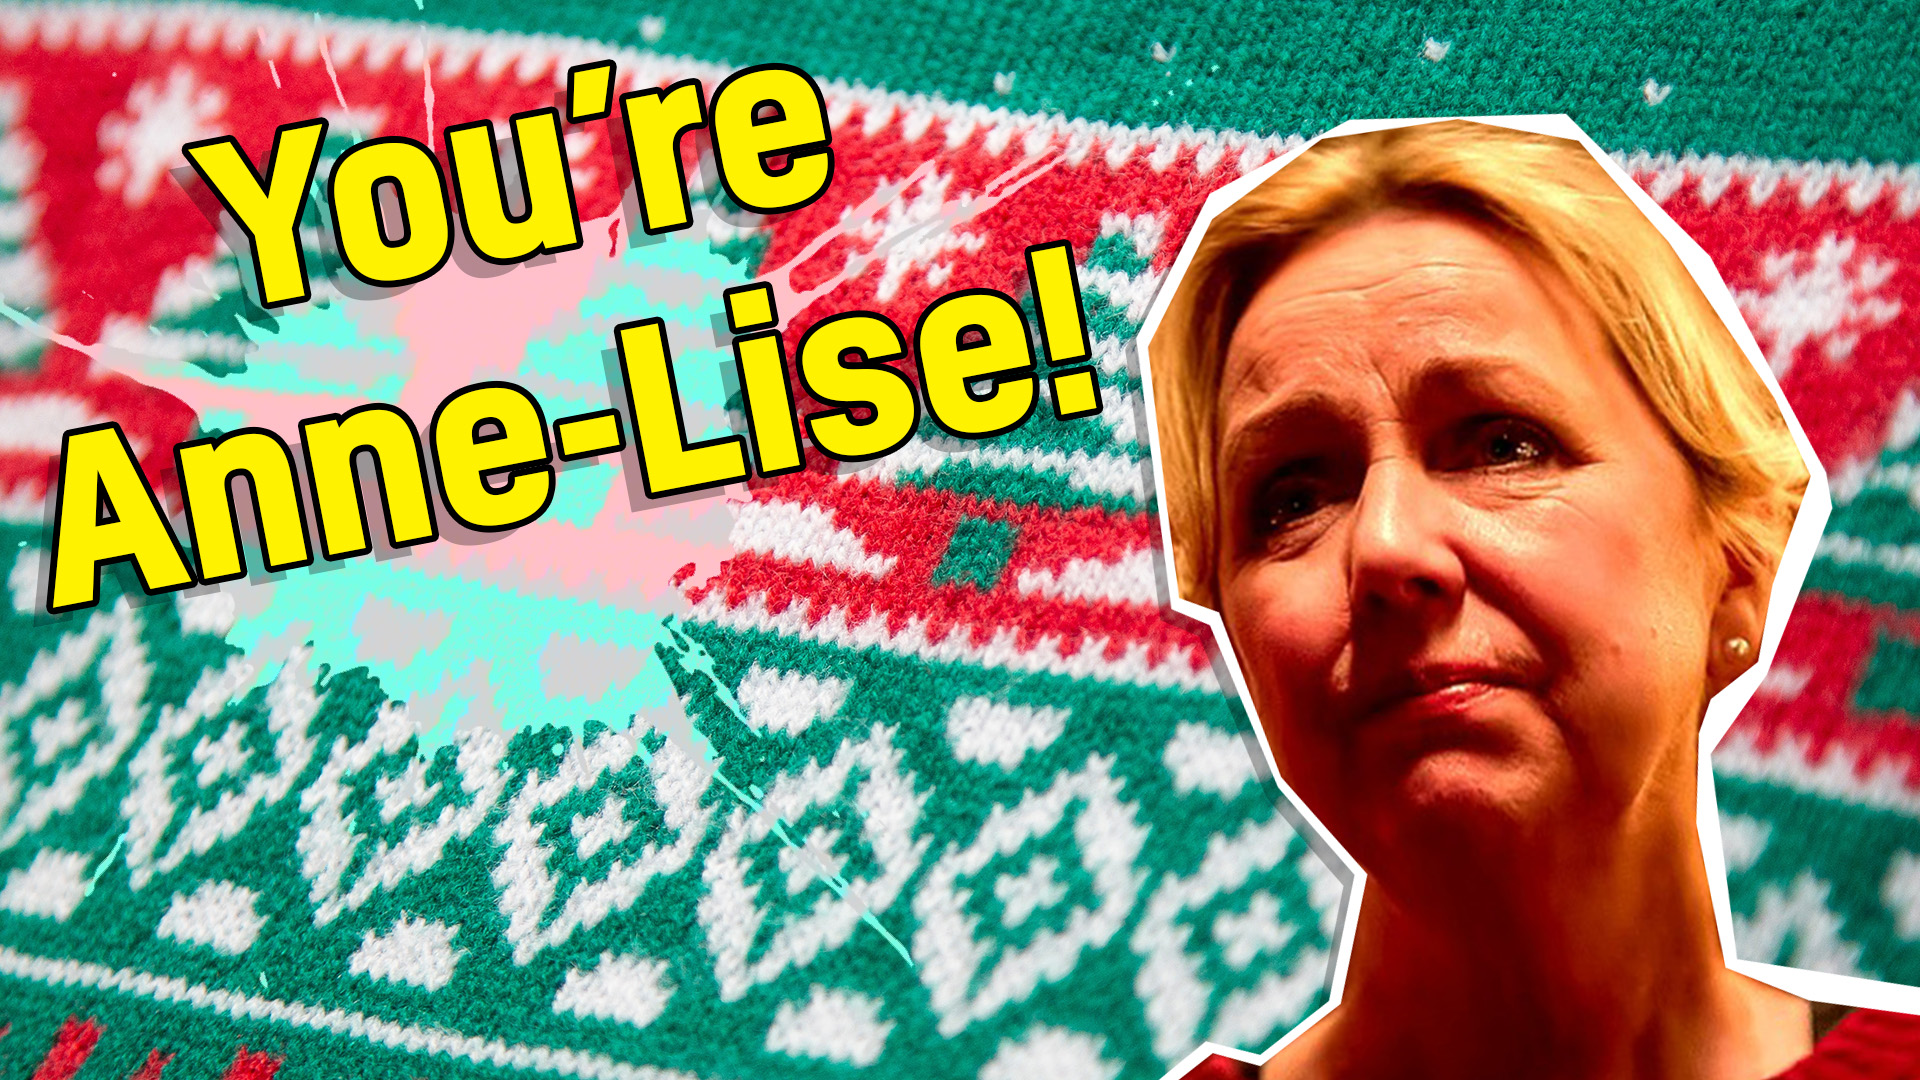 You're Anne-Lise!